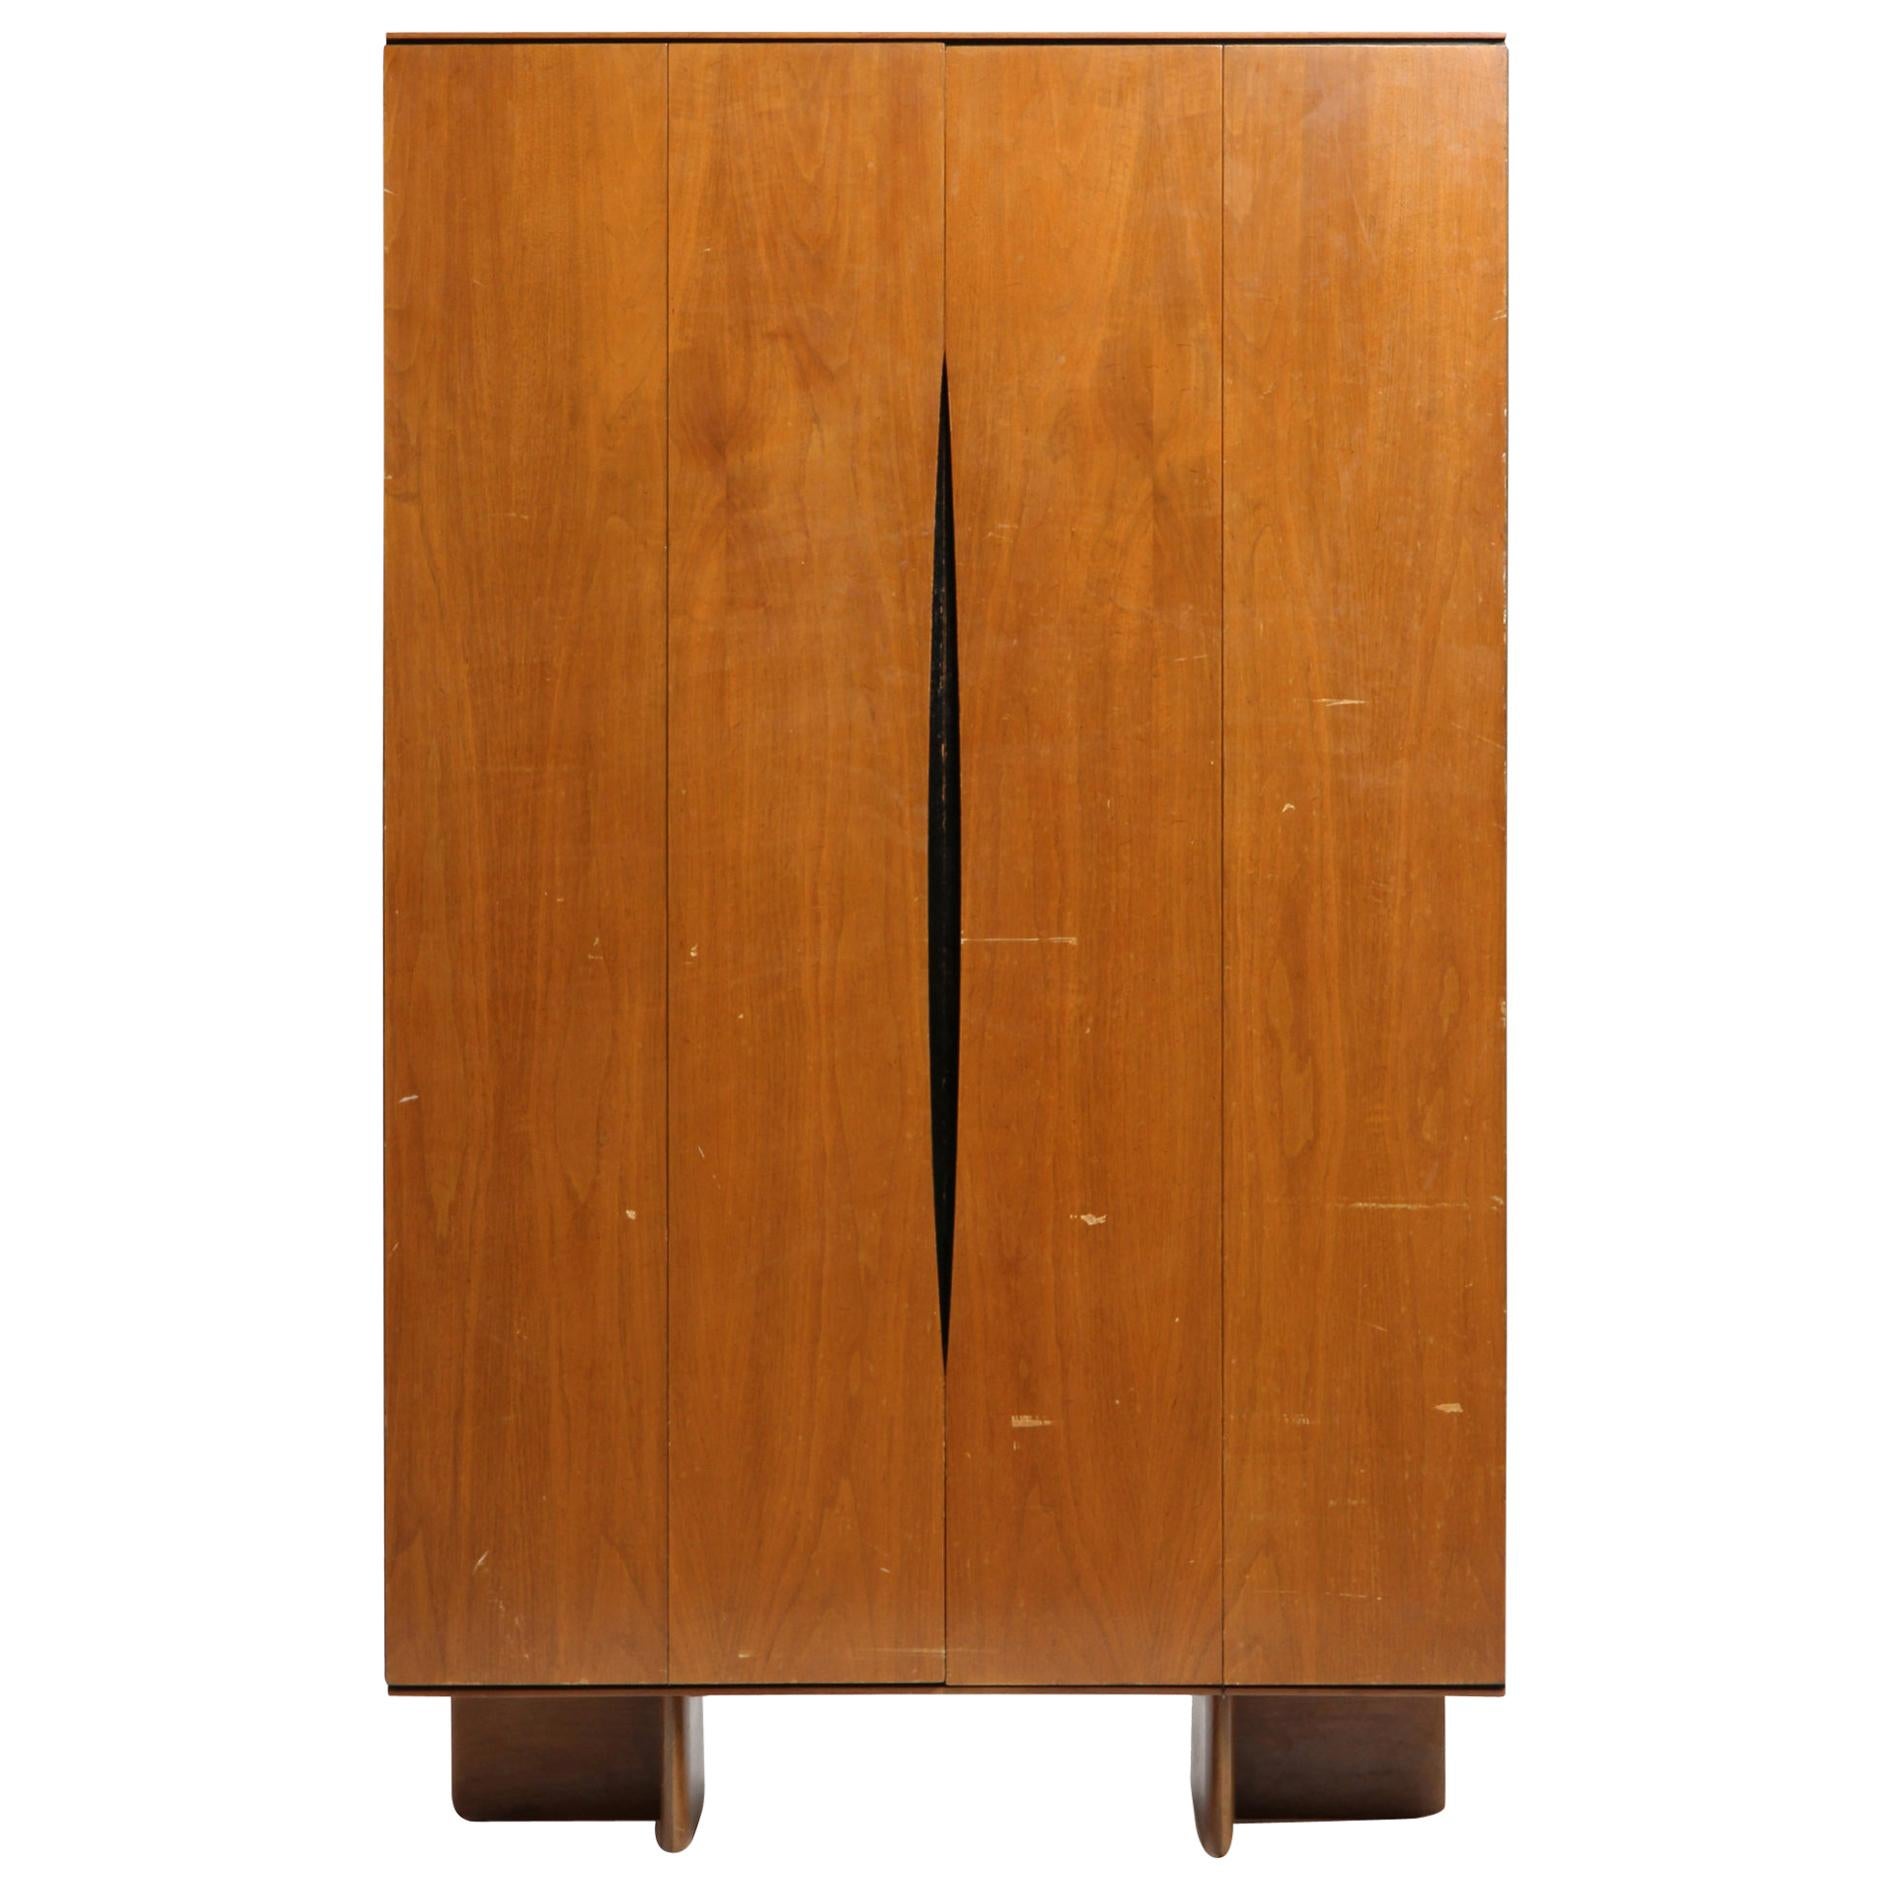 A Mid-Century Modern pale cherrywood wardrobe designed by Vladimir Kagan. This wardrobe has a rectilinear form with bi-fold doors with long distinctive Minimalist recessed pulls, the entire form resting on L-shaped legs. Made by Kagan-Dreyfuss in